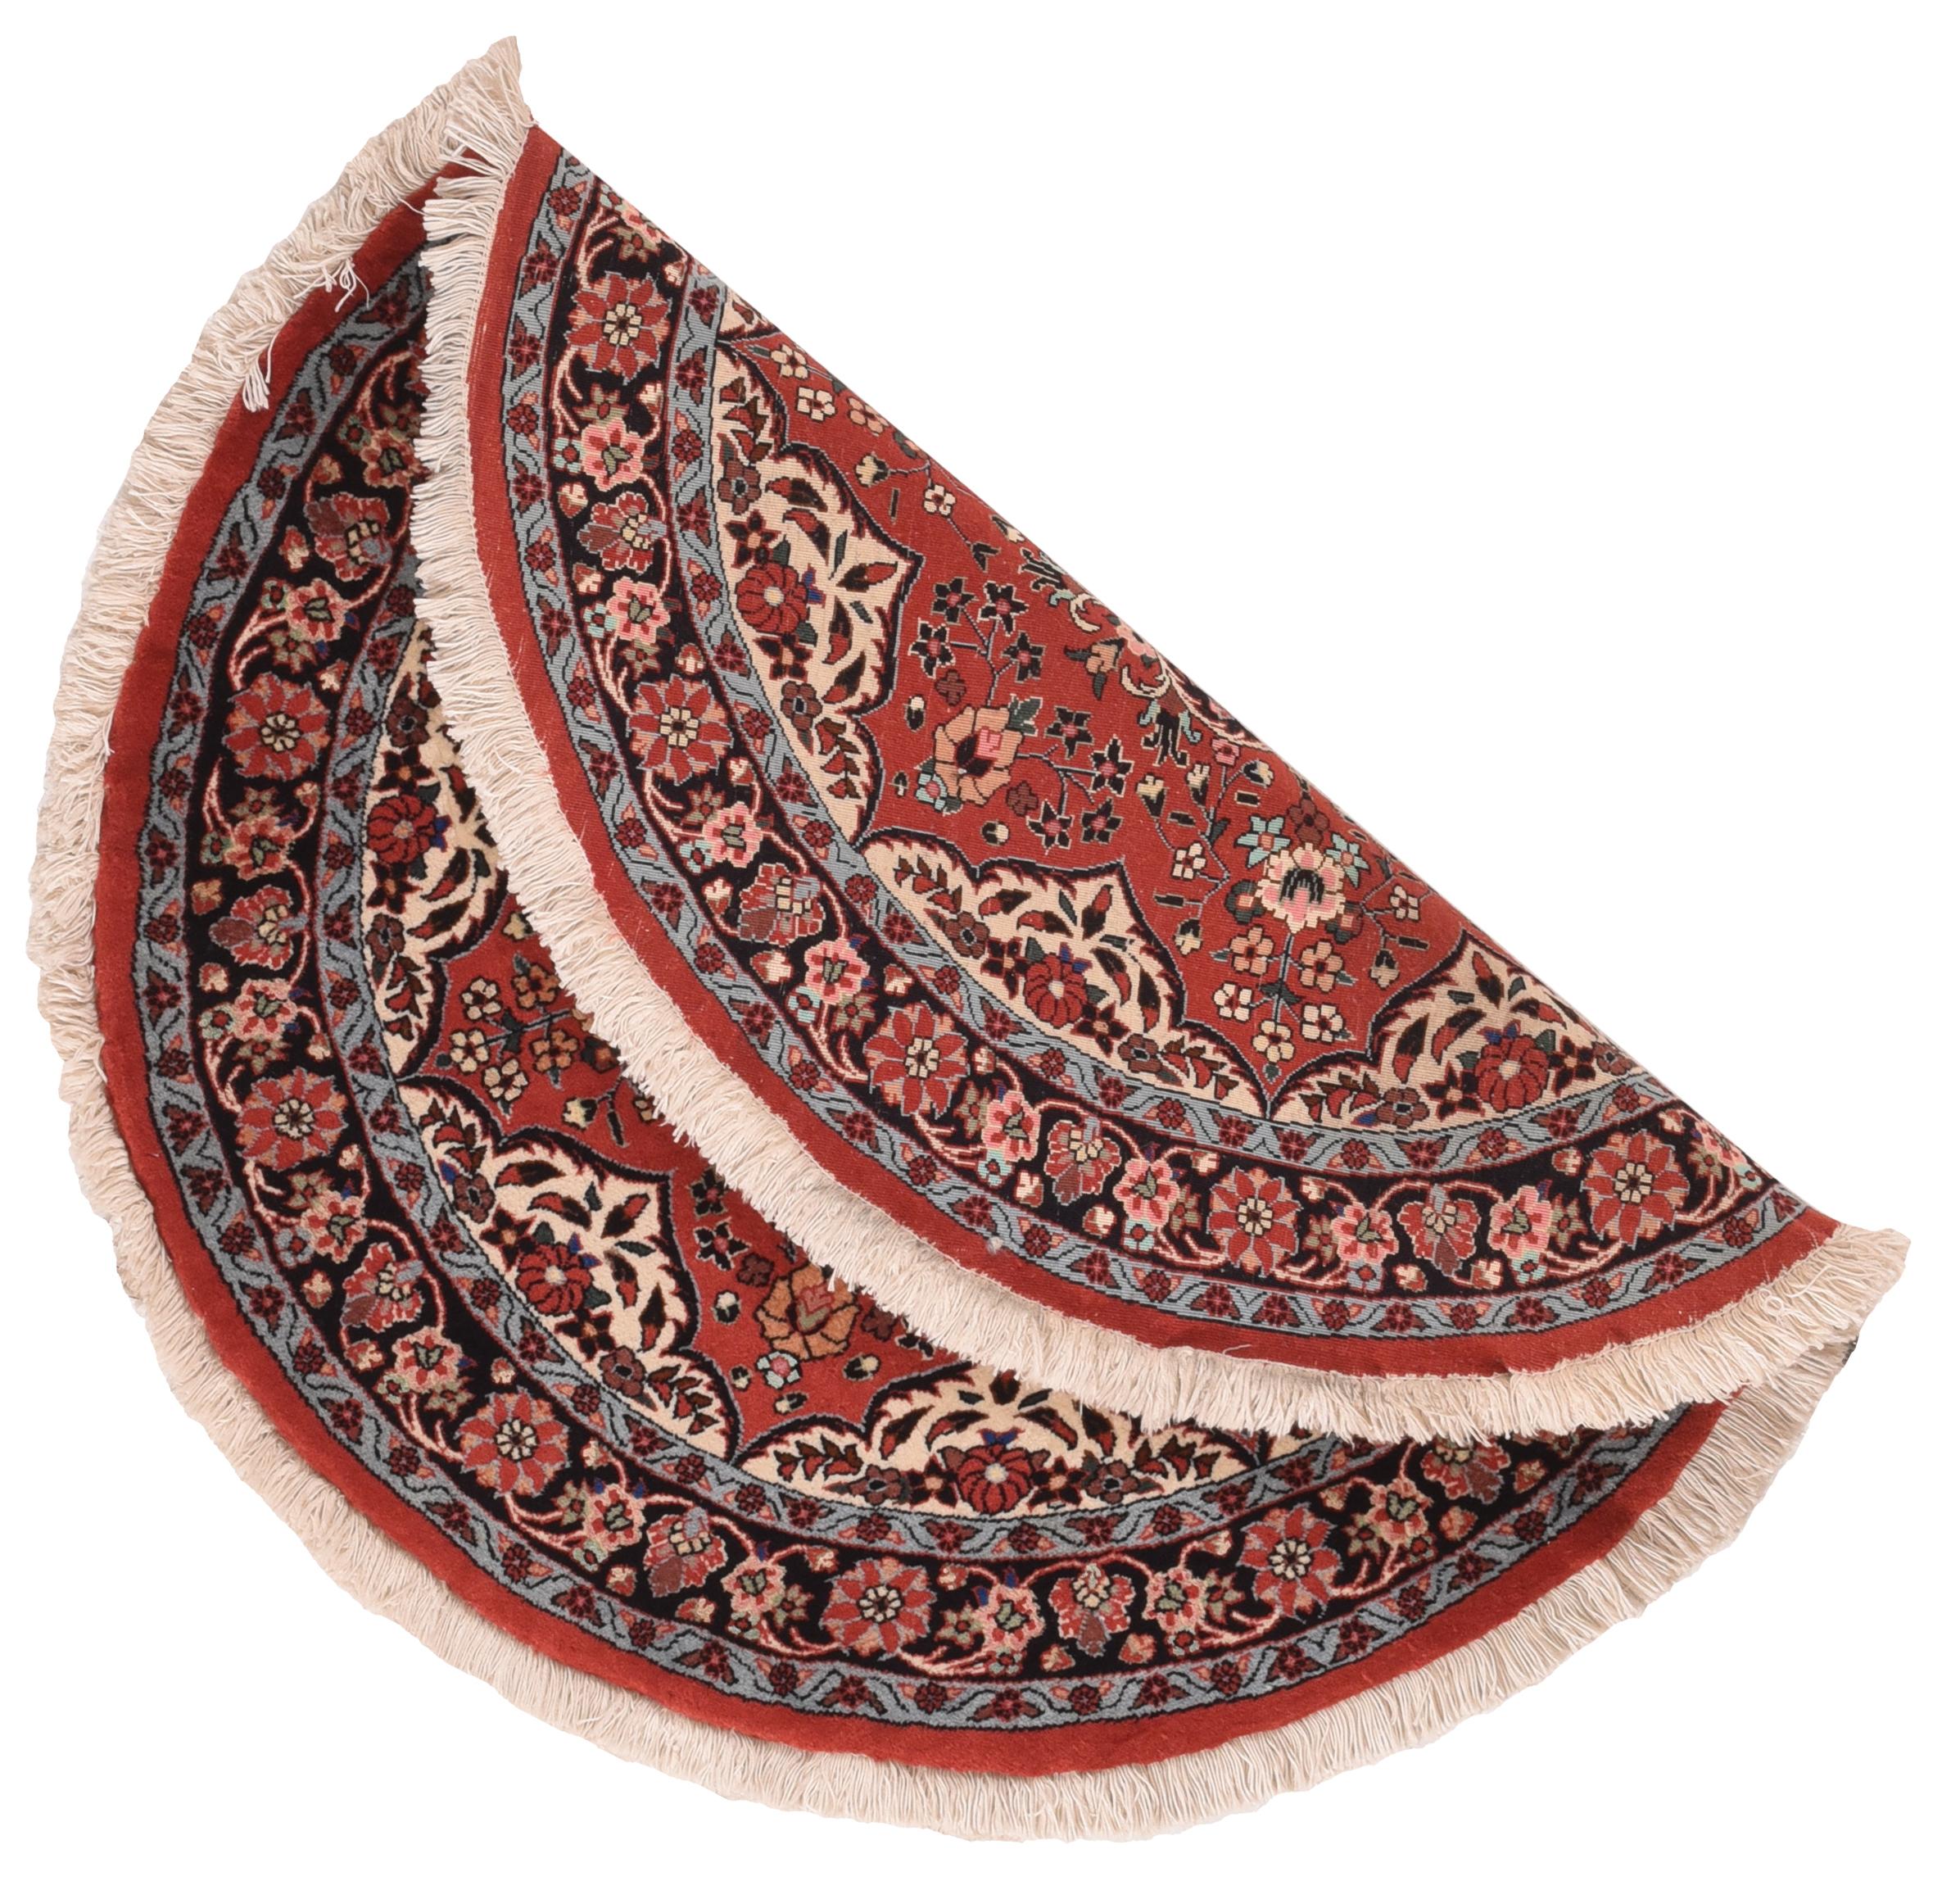 Vintage Bidjar rug 3'3'' x 3'3''. Round or oval rugs are woven on regular square or rectangular looms.. This well-woven example shows an eight-pointed red star-like field centred by a navy acanthus volute octofoil medallion with a red and cream